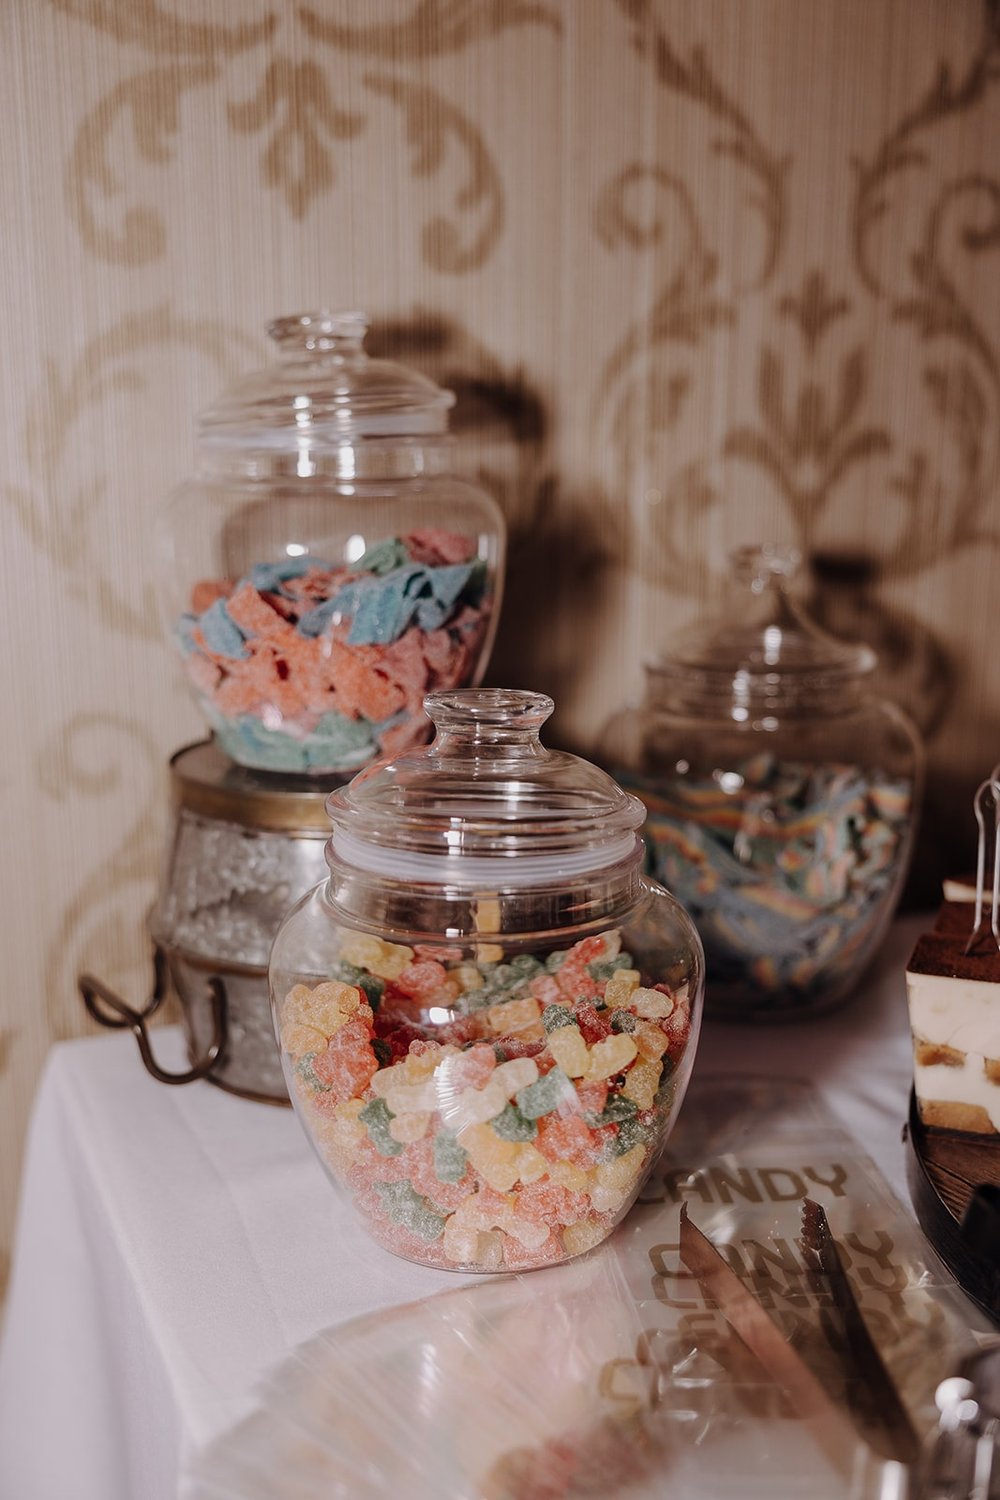 Sour candy in glass jars